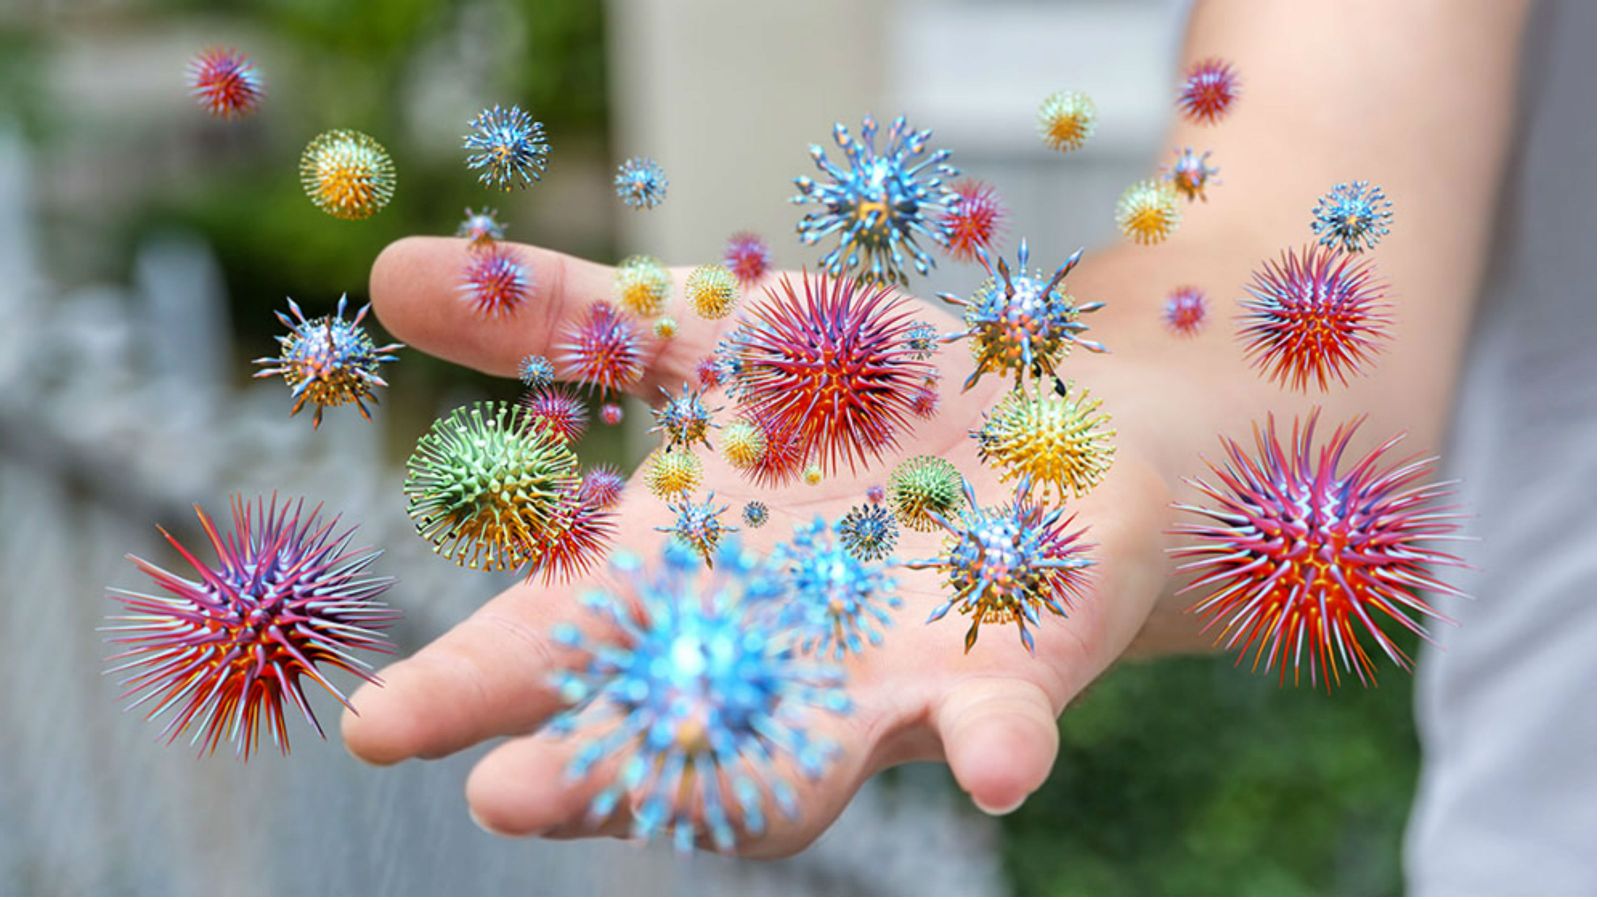 Dozens of colourful spikey spheres orbiting an outstretch human hand.